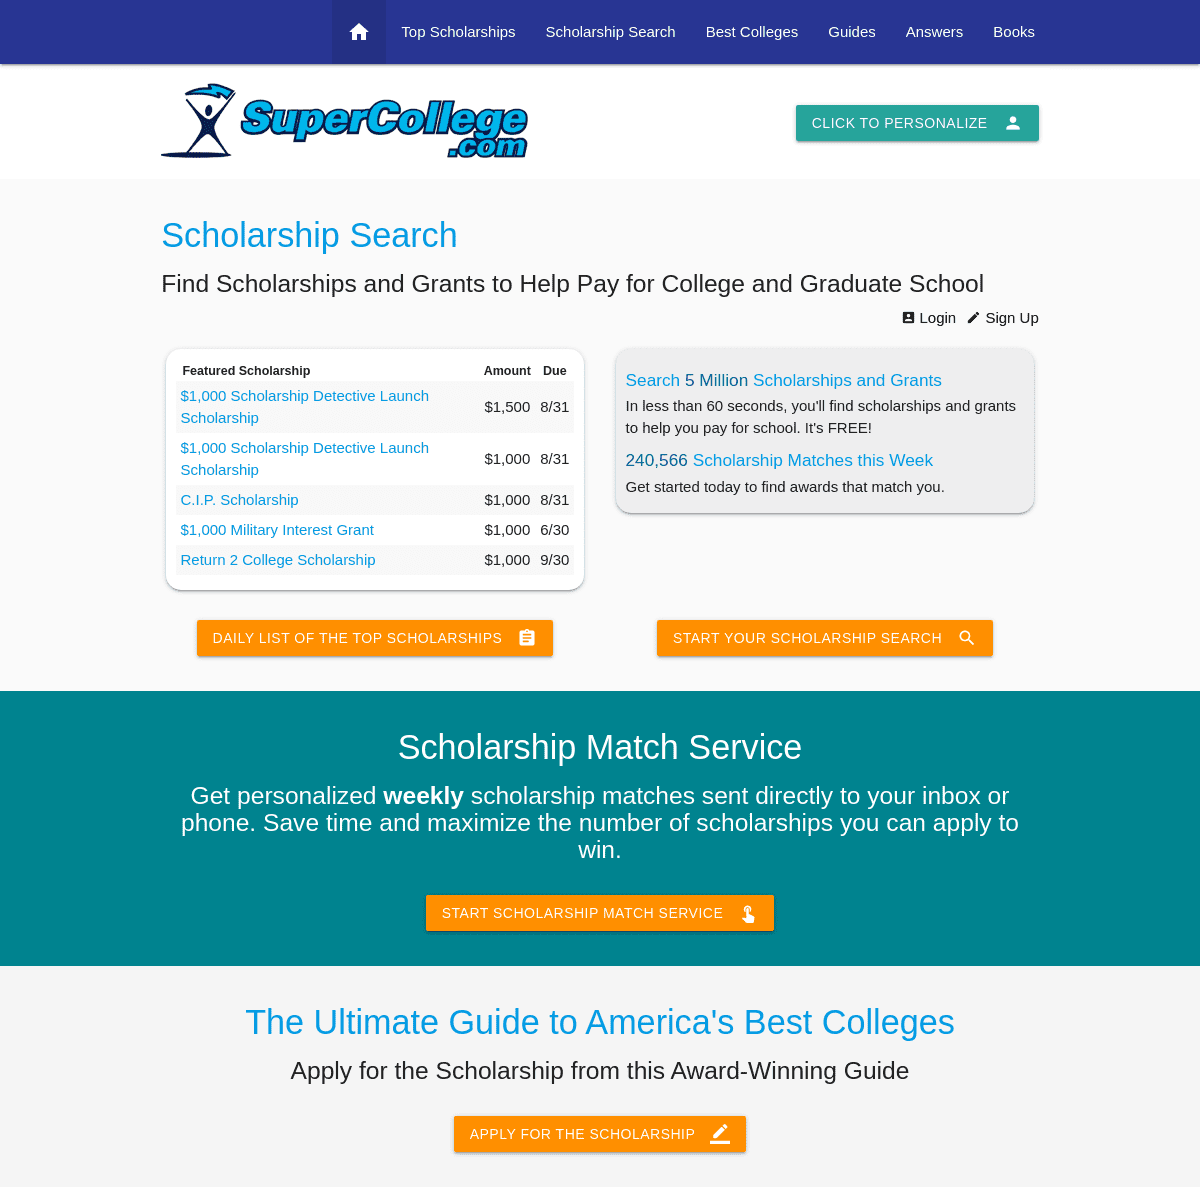 A complete backup of https://supercollege.com